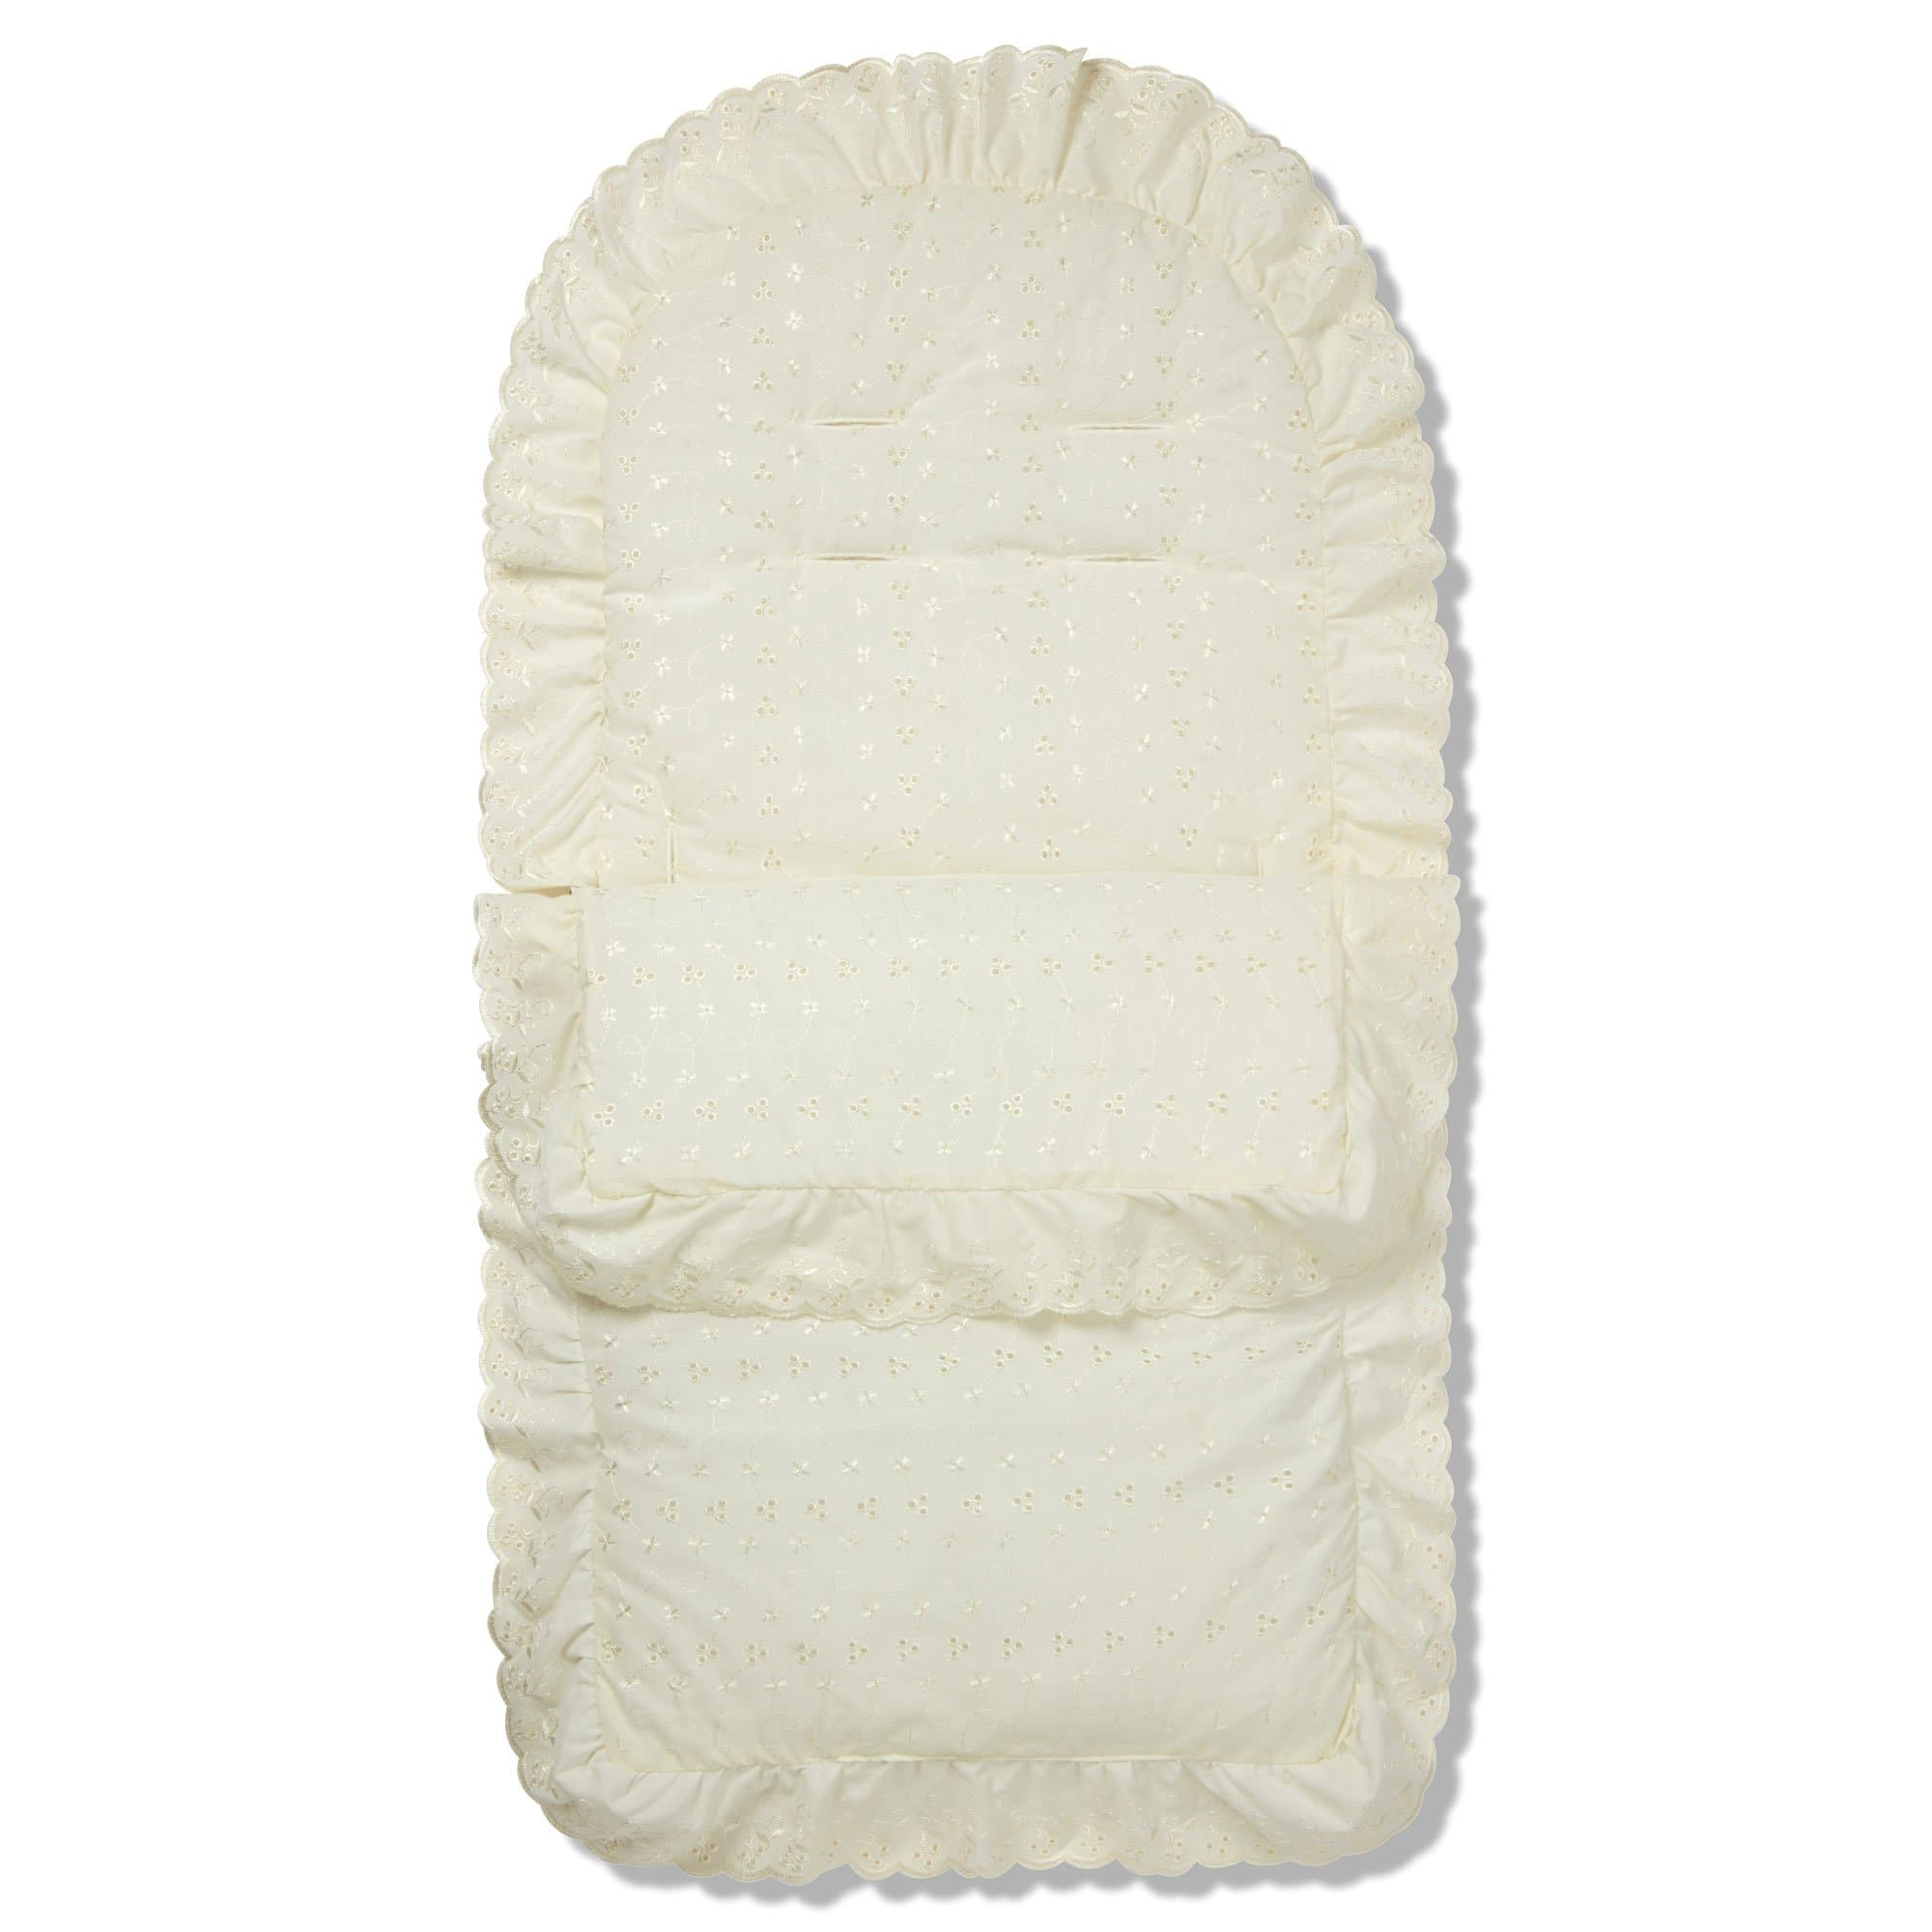 Broderie Anglaise Footmuff / Cosy Toes Compatible with BabySun - For Your Little One